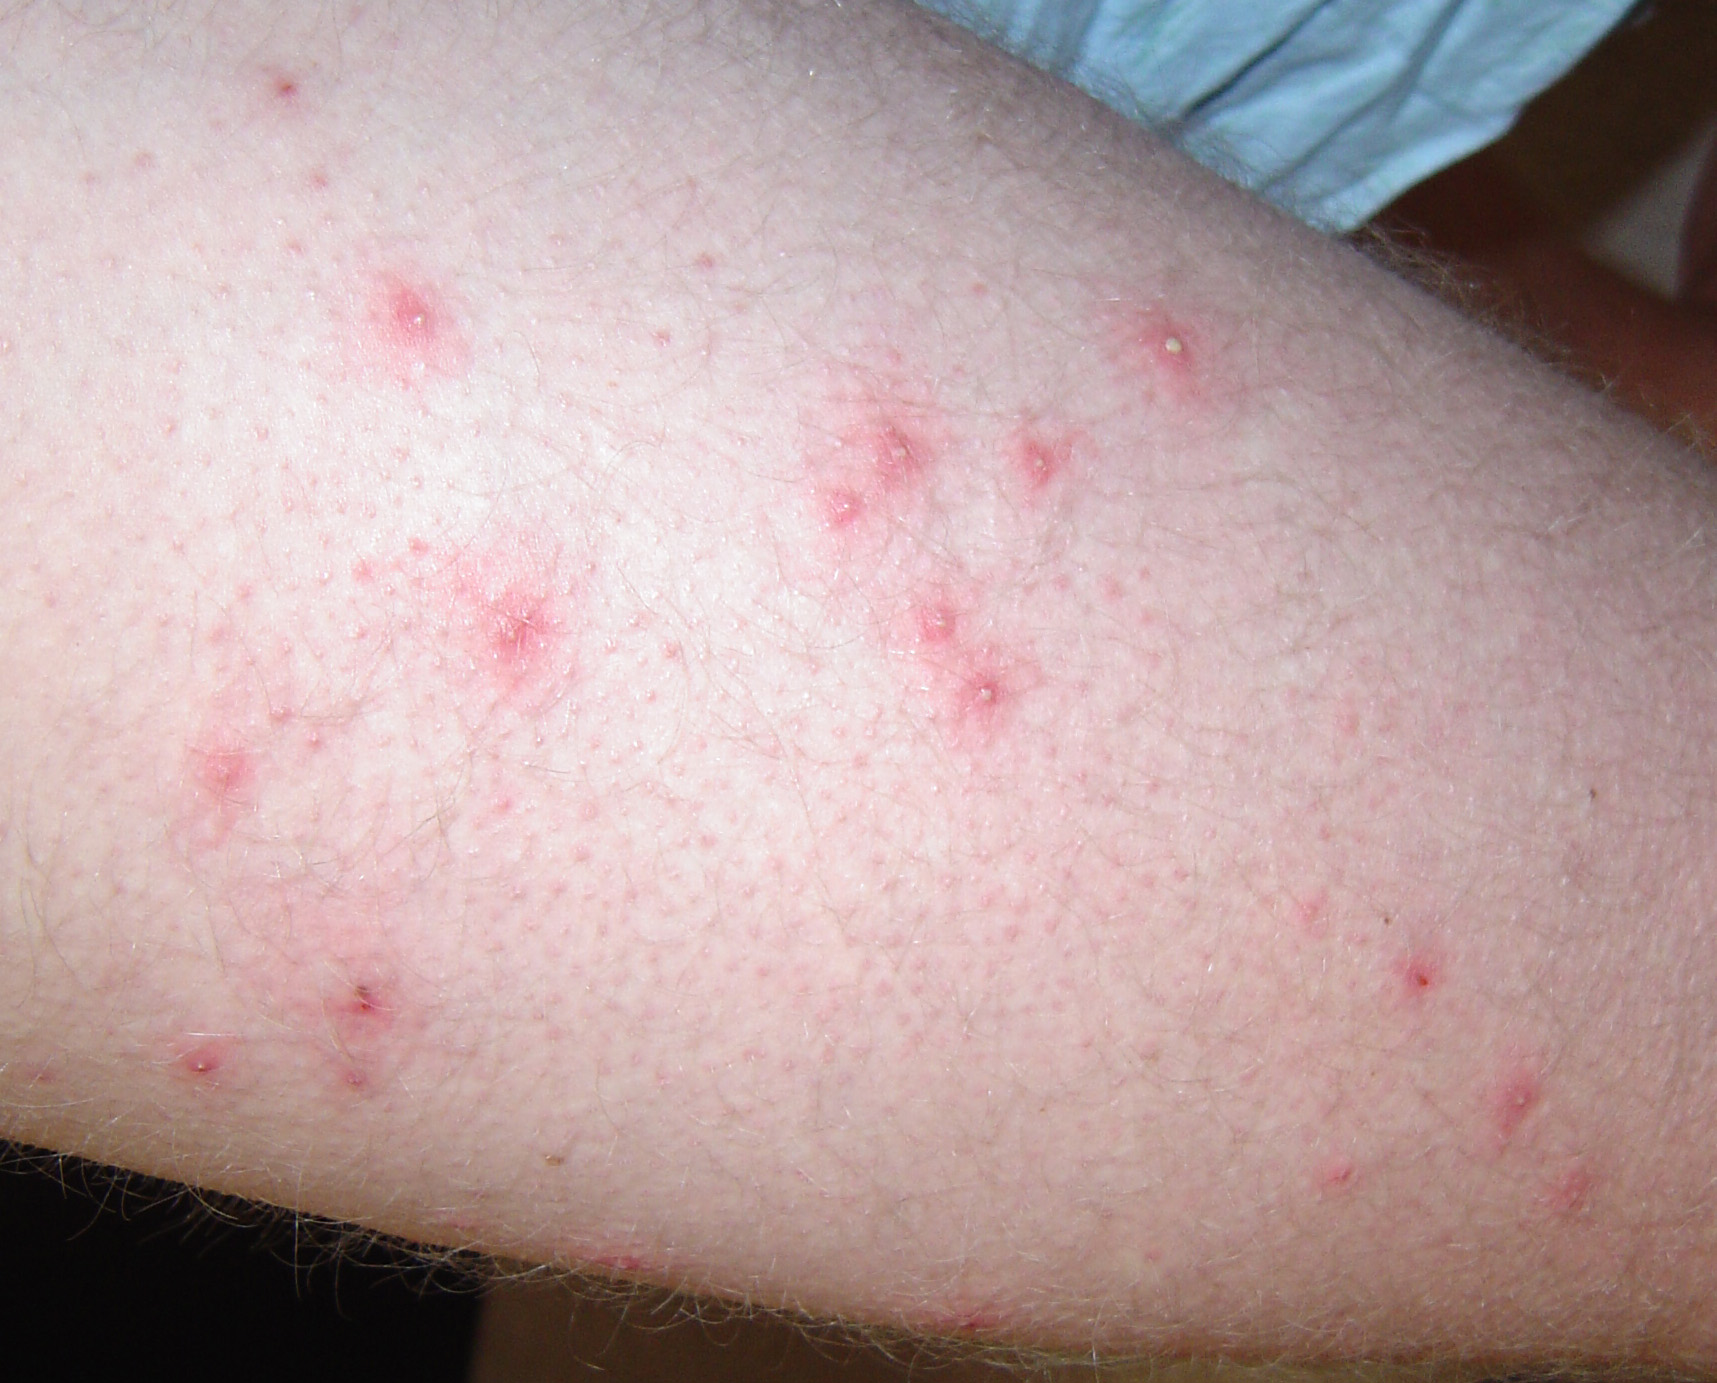 Folliculitis - Pictures, Symptoms, Treatment and Prevention